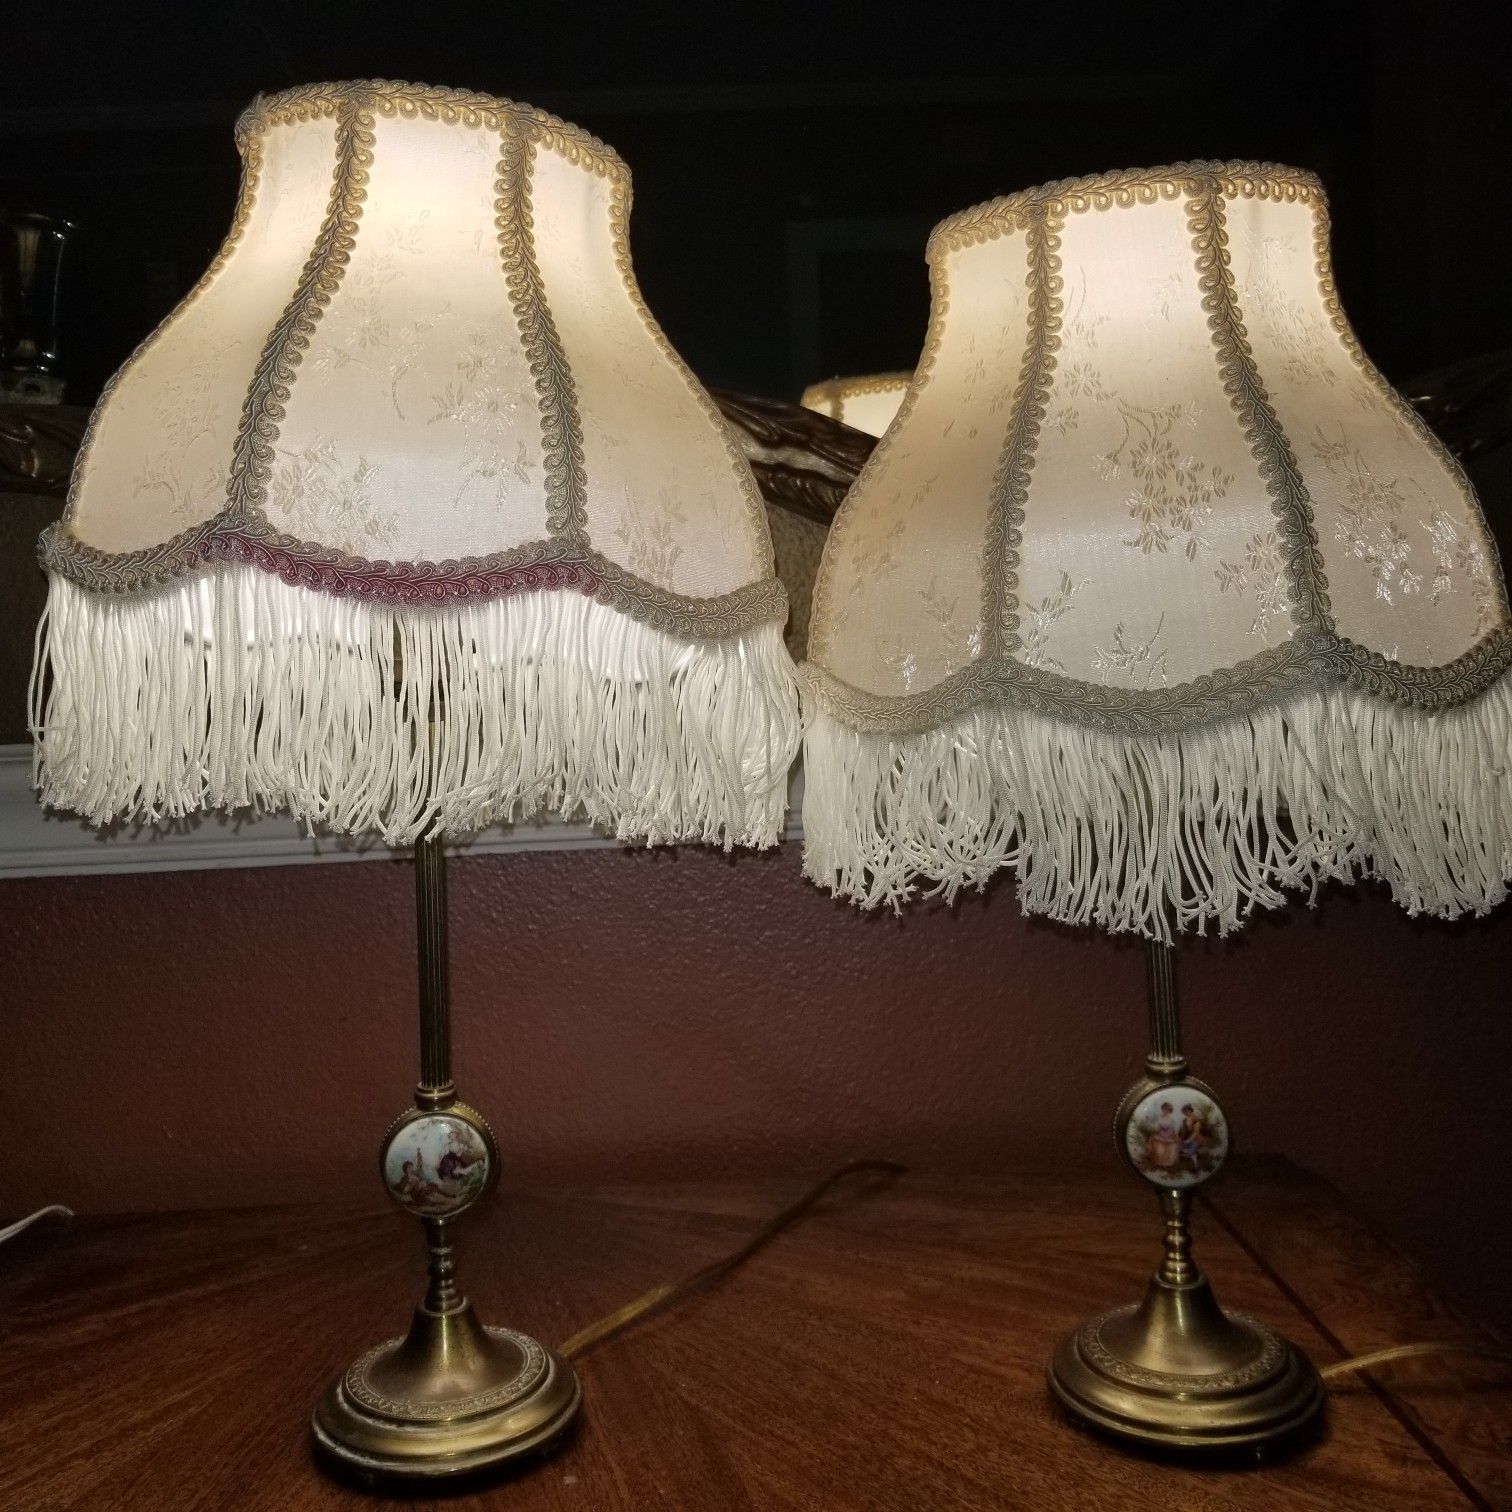 Antique brass and limoge porcelain lamps